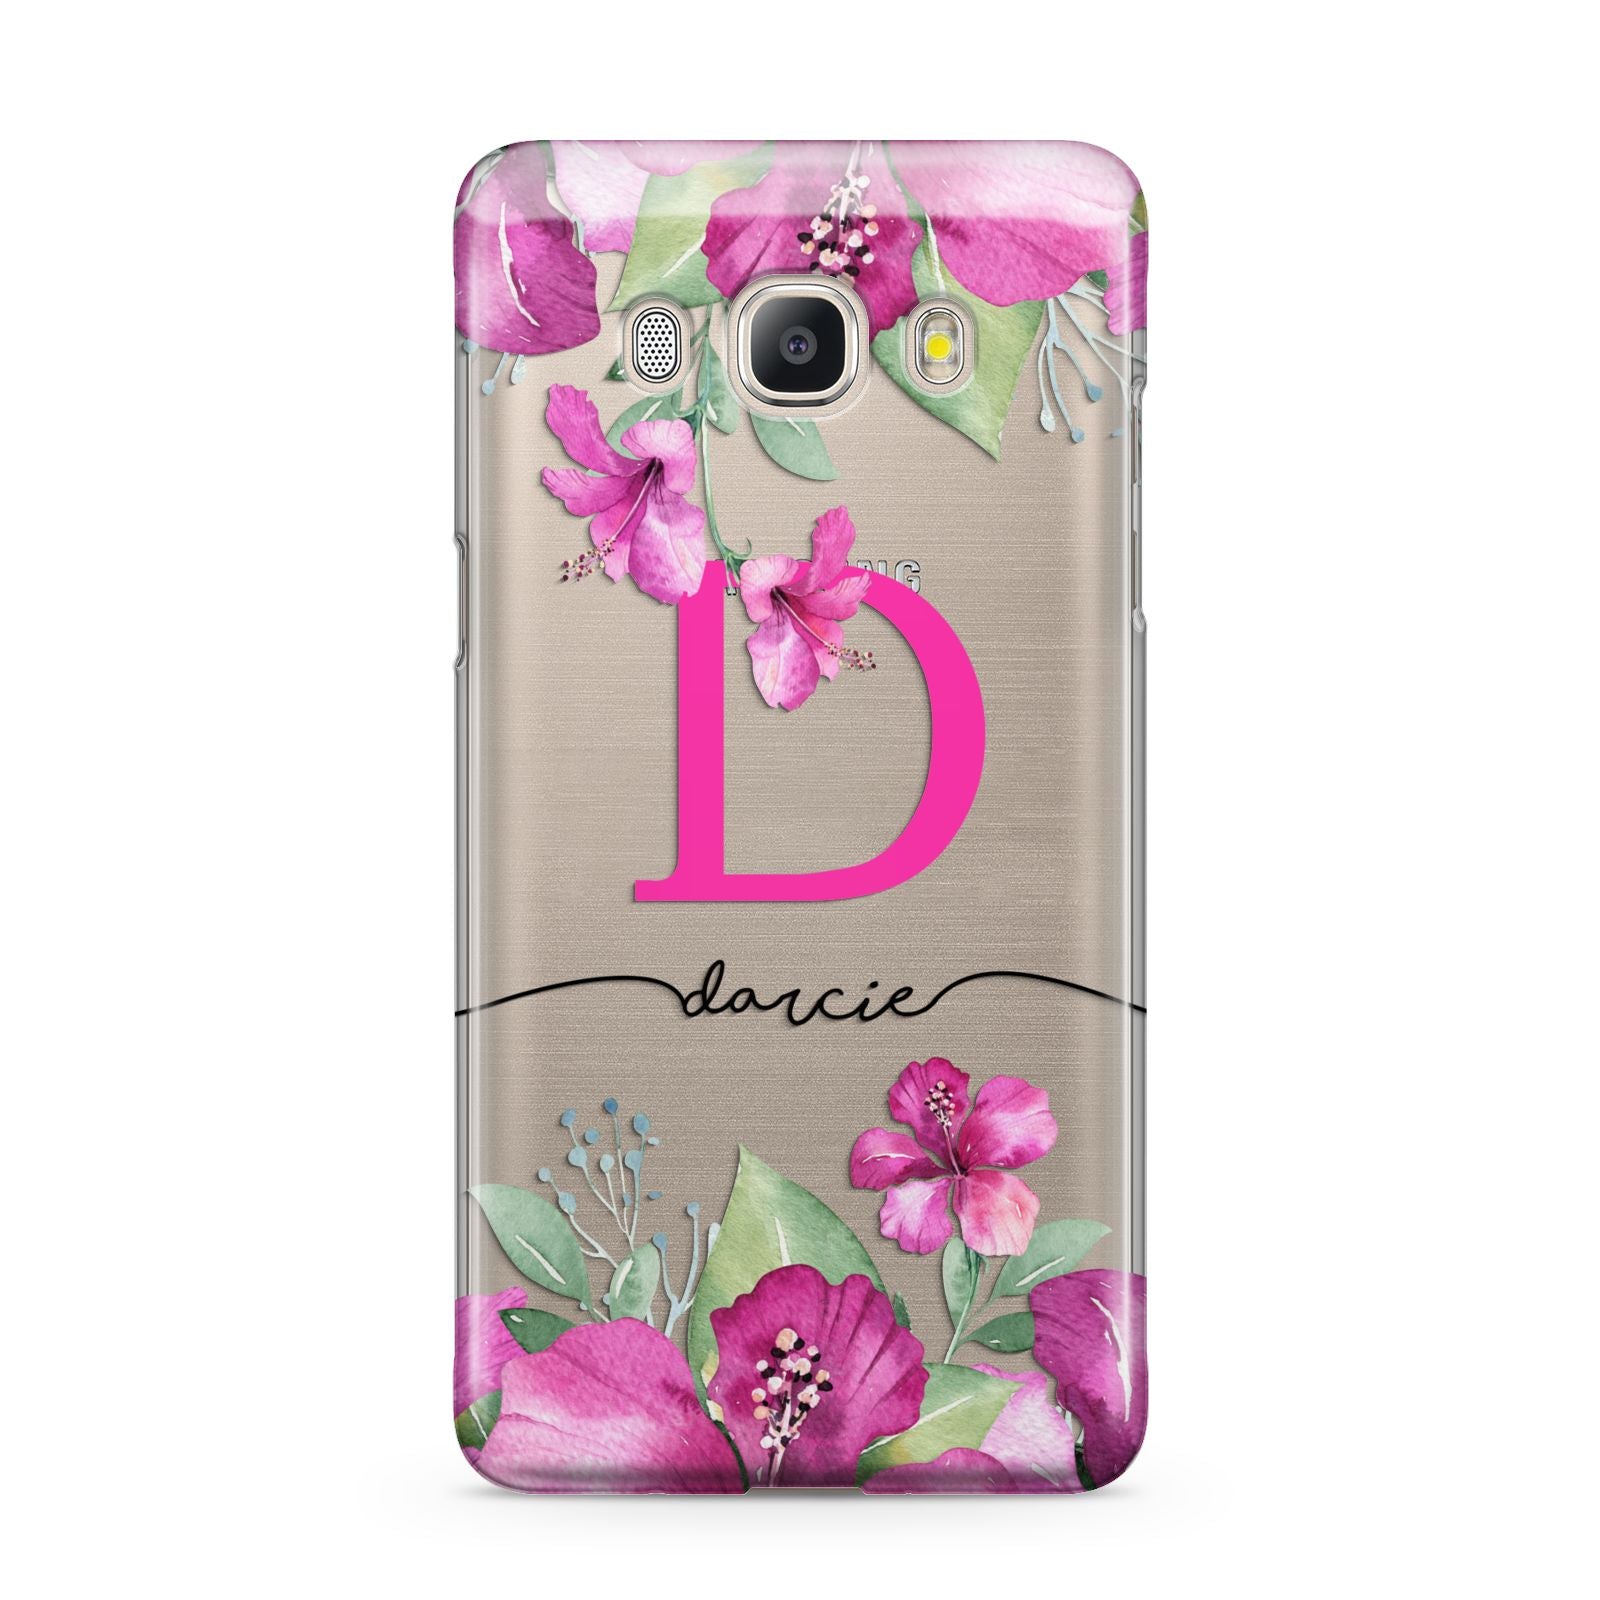 Personalised Pink Lilies Samsung Galaxy J5 2016 Case